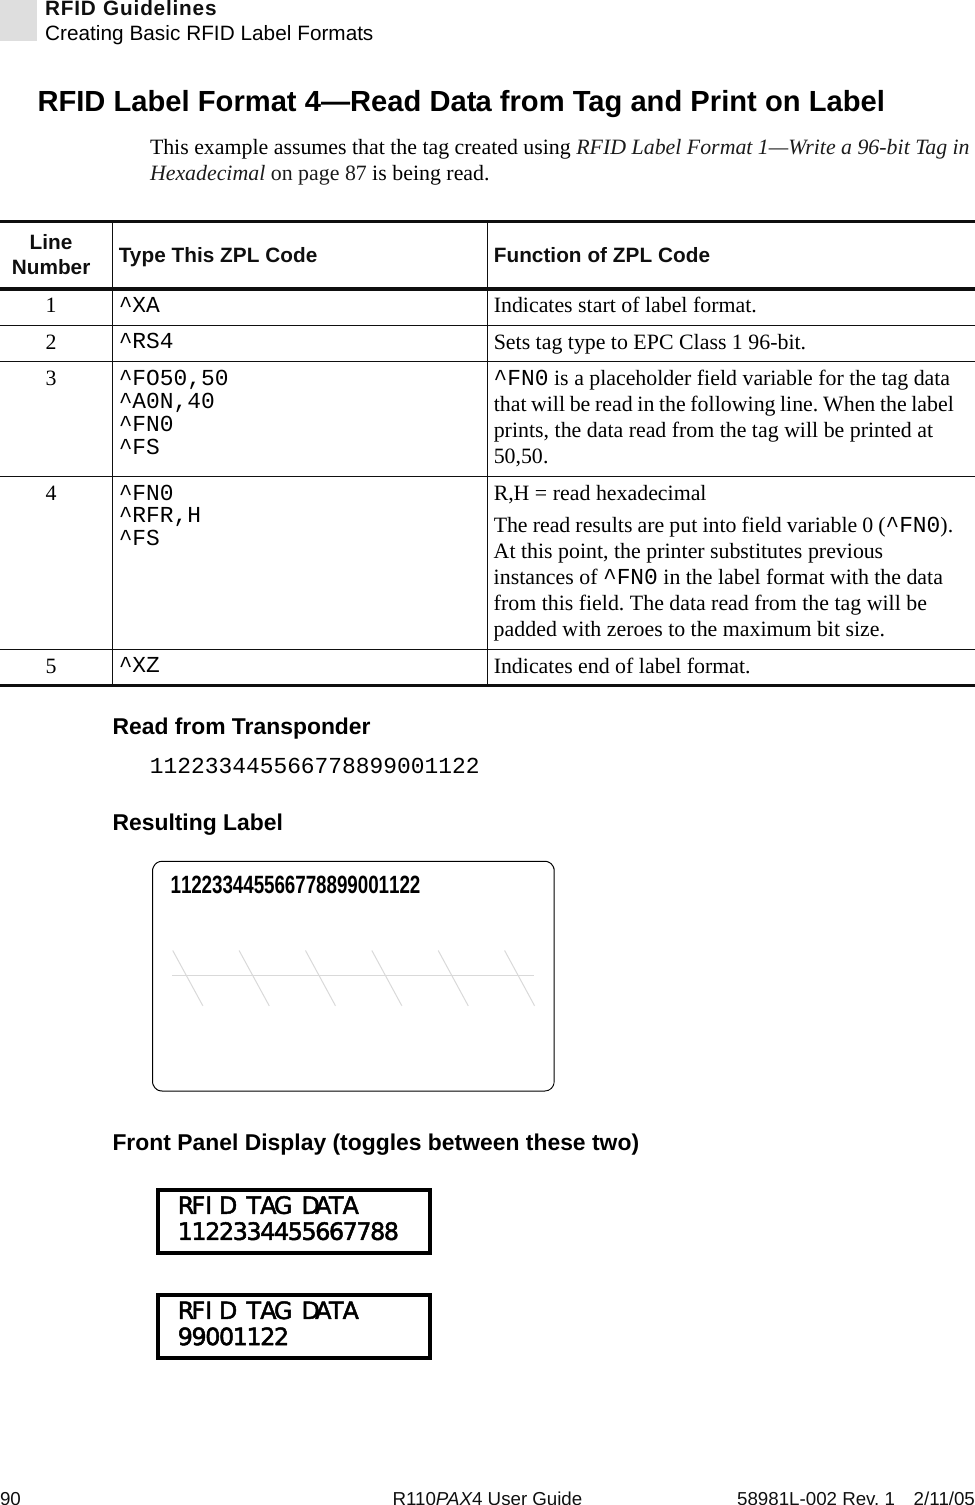 90 R110PAX4 User Guide 58981L-002 Rev. 1 2/11/05RFID GuidelinesCreating Basic RFID Label FormatsRFID Label Format 4—Read Data from Tag and Print on LabelThis example assumes that the tag created using RFID Label Format 1—Write a 96-bit Tag in Hexadecimal on page 87 is being read.Read from Transponder112233445566778899001122Resulting LabelFront Panel Display (toggles between these two)Line Number Type This ZPL Code Function of ZPL Code1^XA Indicates start of label format.2^RS4 Sets tag type to EPC Class 1 96-bit.3^FO50,50^A0N,40^FN0^FS^FN0 is a placeholder field variable for the tag data that will be read in the following line. When the label prints, the data read from the tag will be printed at 50,50.4^FN0^RFR,H^FSR,H = read hexadecimalThe read results are put into field variable 0 (^FN0). At this point, the printer substitutes previous instances of ^FN0 in the label format with the data from this field. The data read from the tag will be padded with zeroes to the maximum bit size.5^XZ Indicates end of label format.112233445566778899001122 RFID TAG DATA 1122334455667788 RFID TAG DATA 99001122